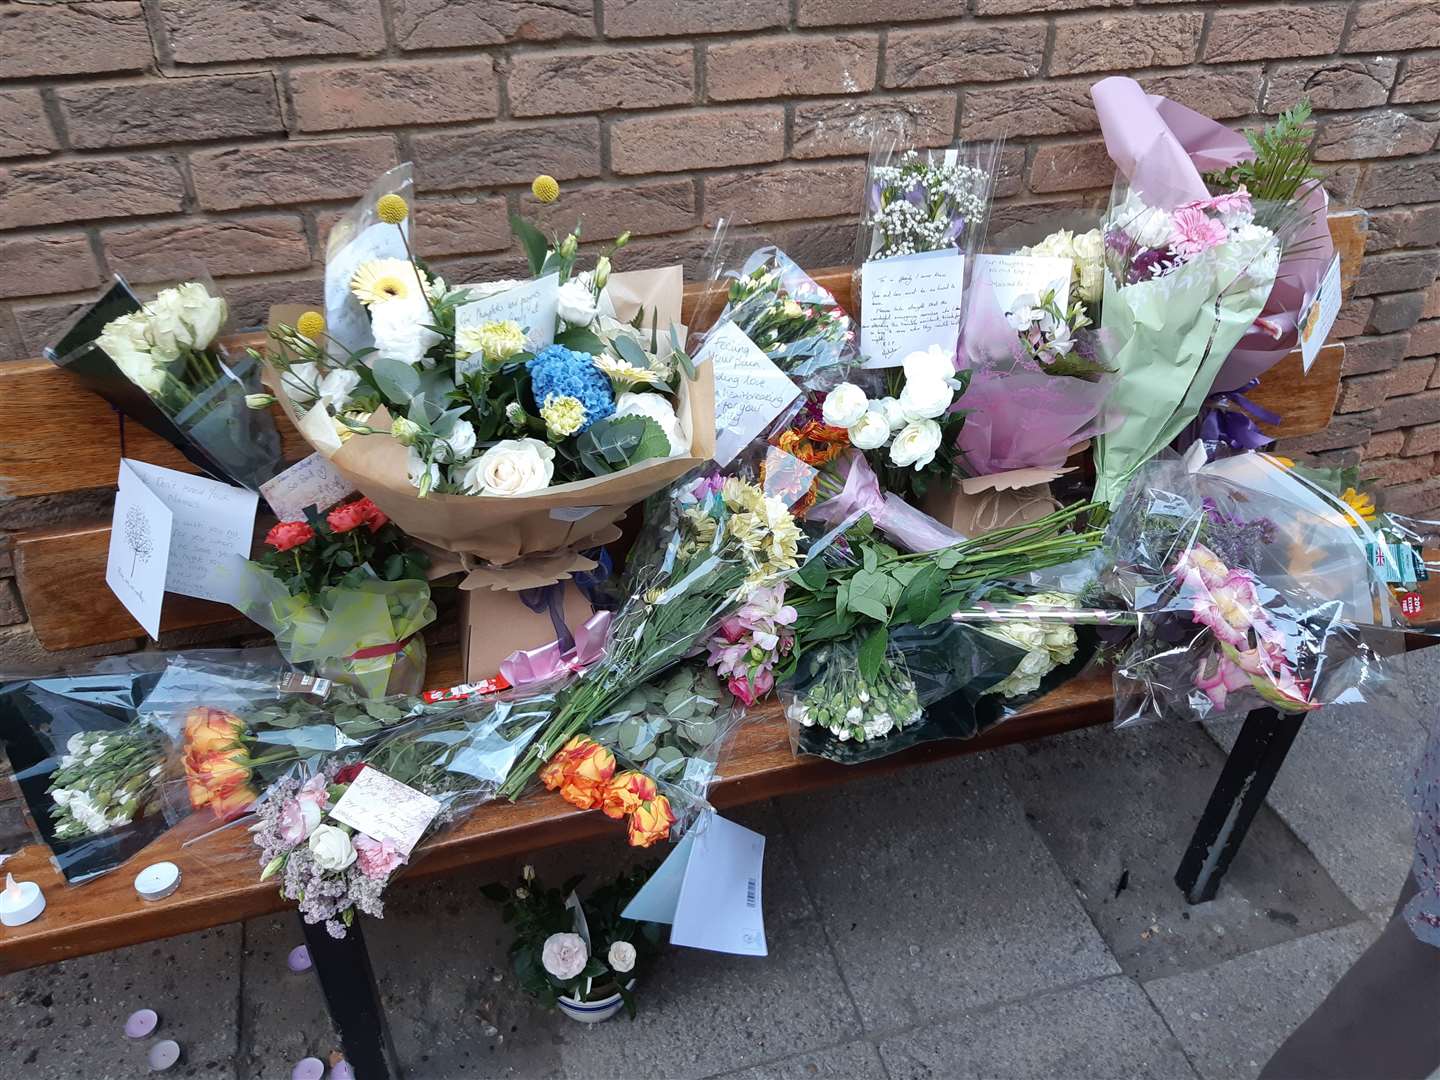 Flower tributes cover a bench at the scene